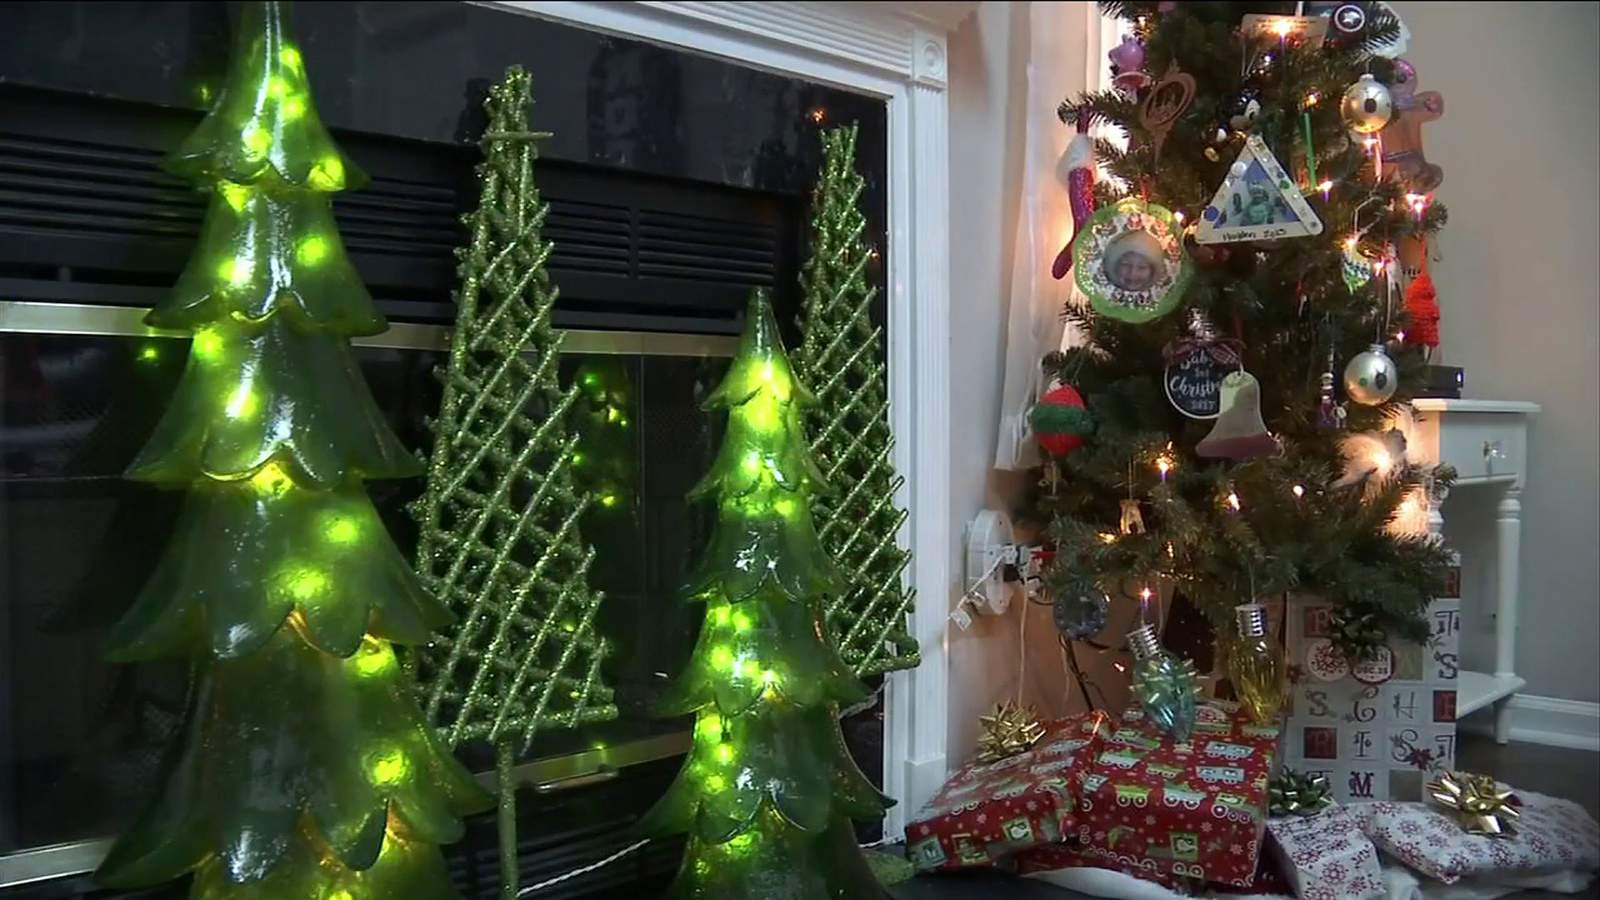 Christmas lights cause 770 house fires every year, National Fire